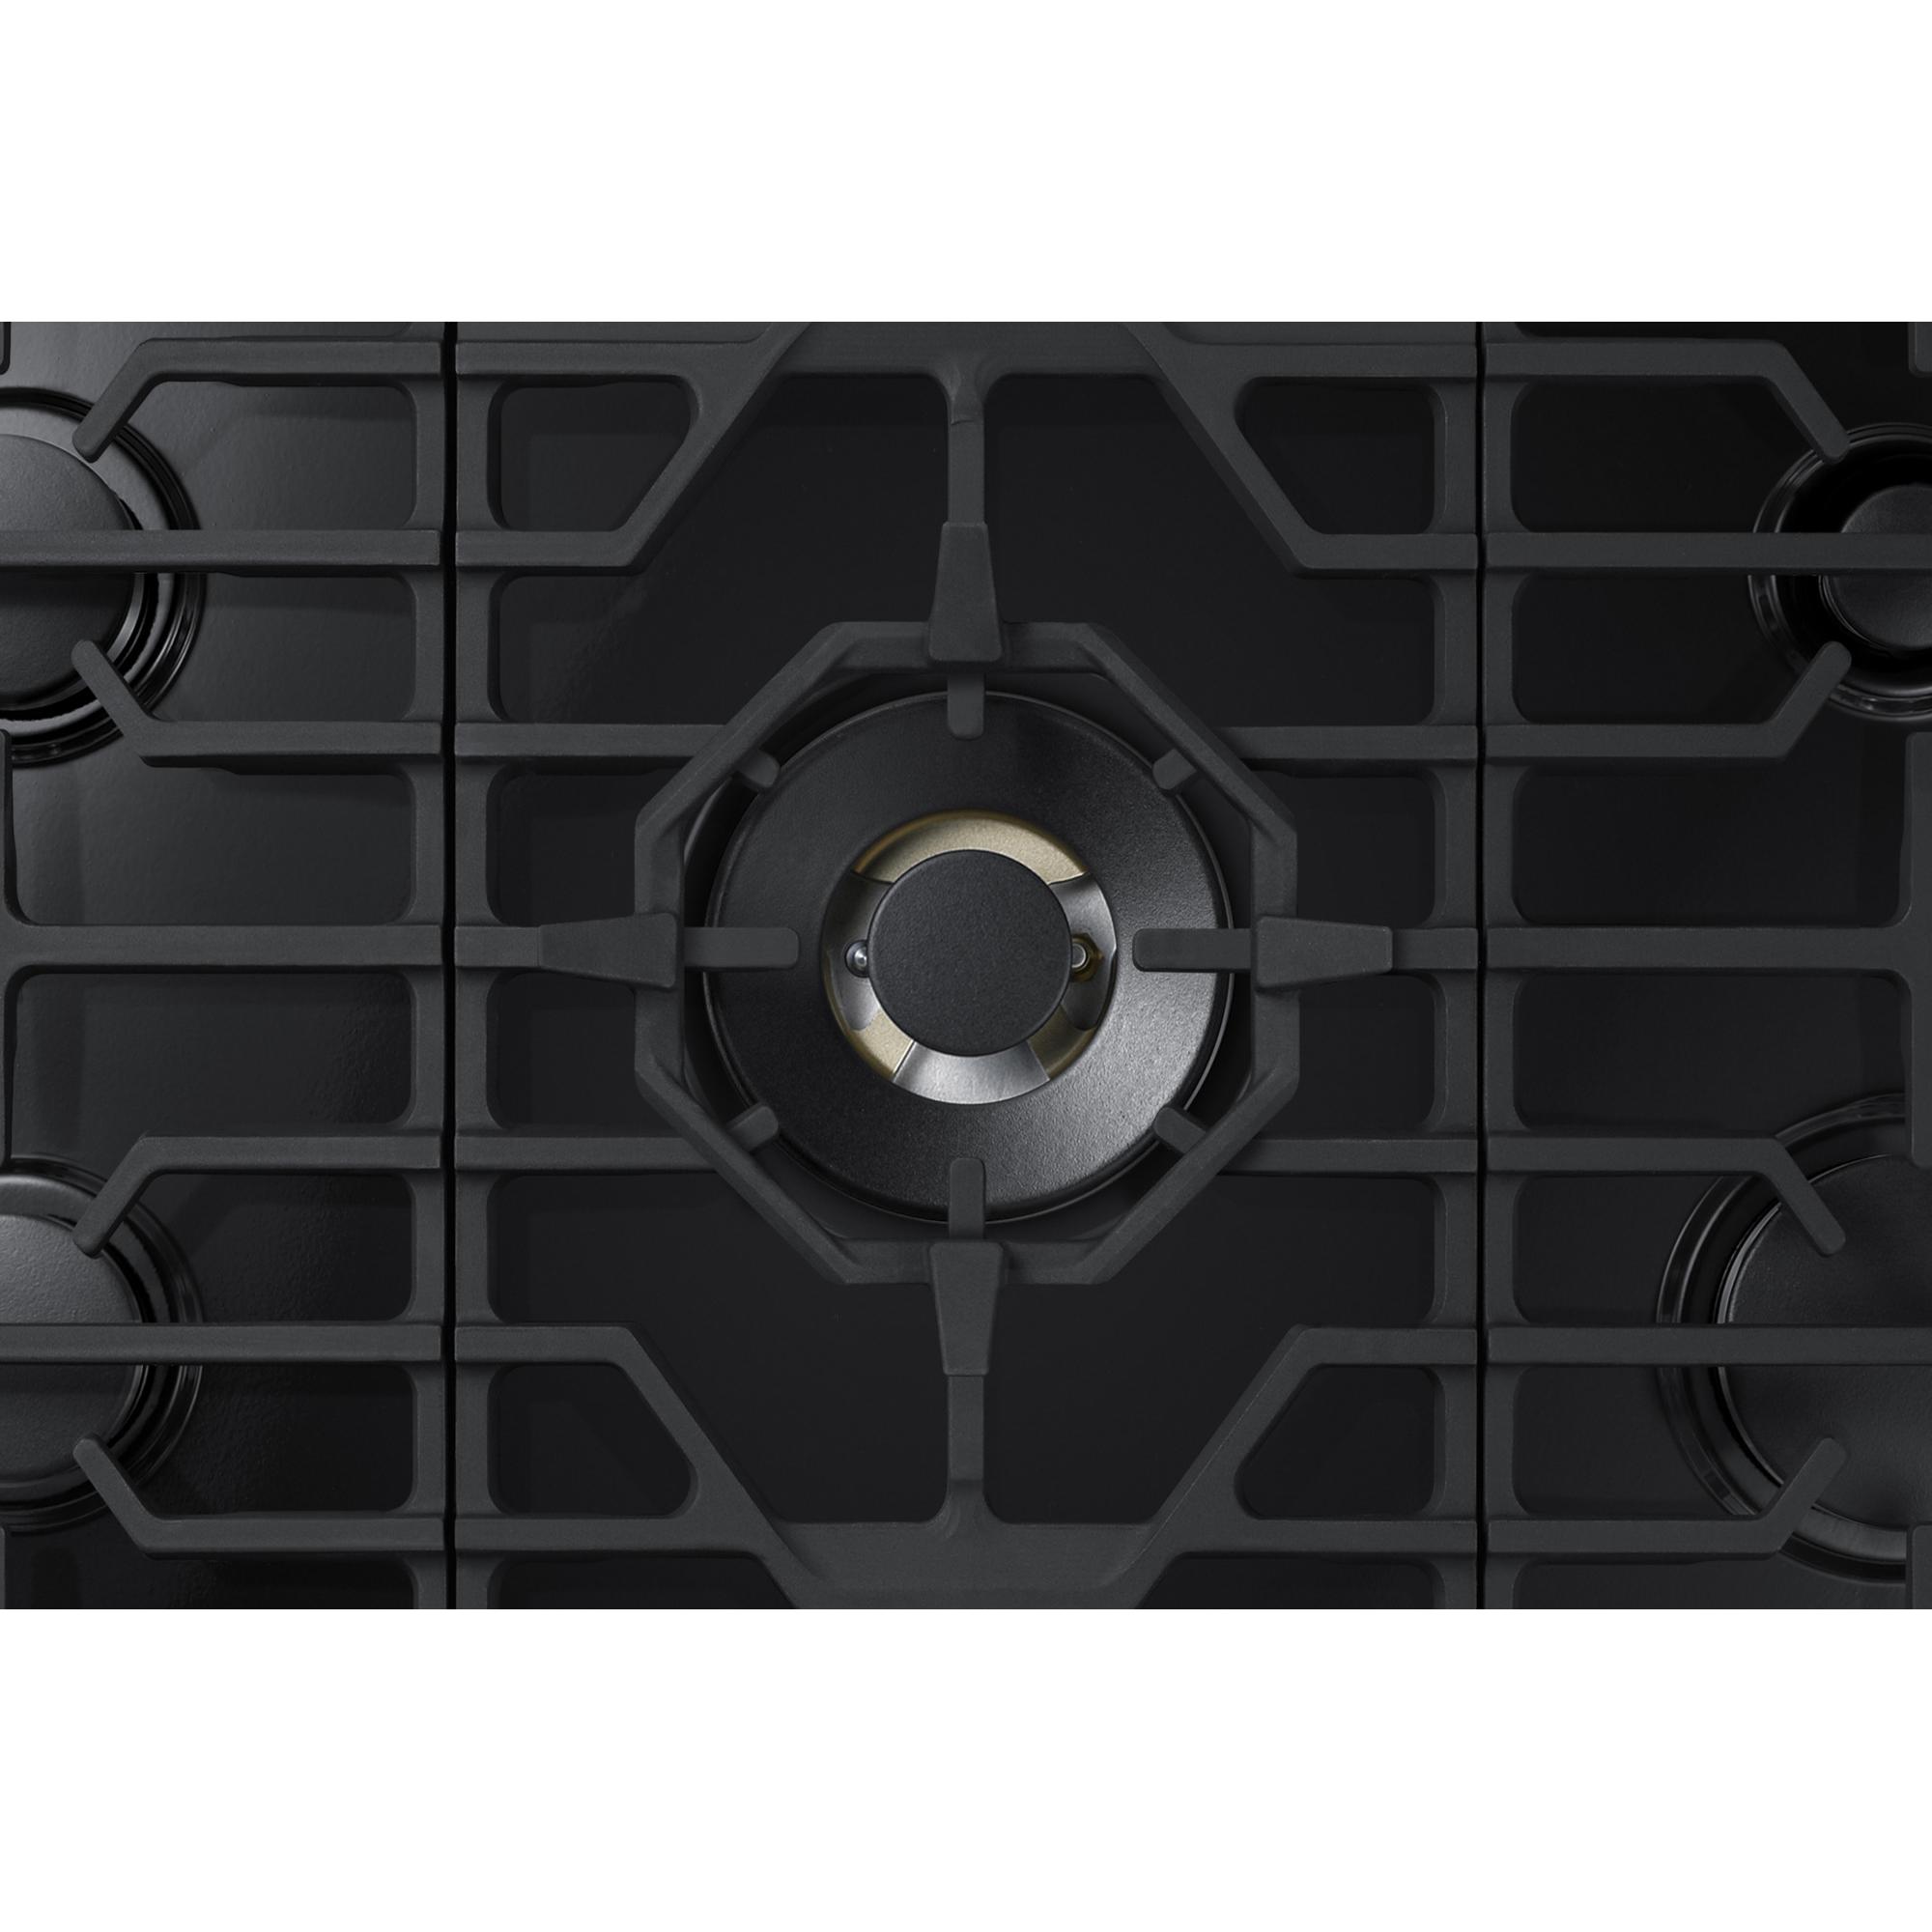 Samsung 36-inch Built-In Gas Cooktop NA36K7750TS/AA